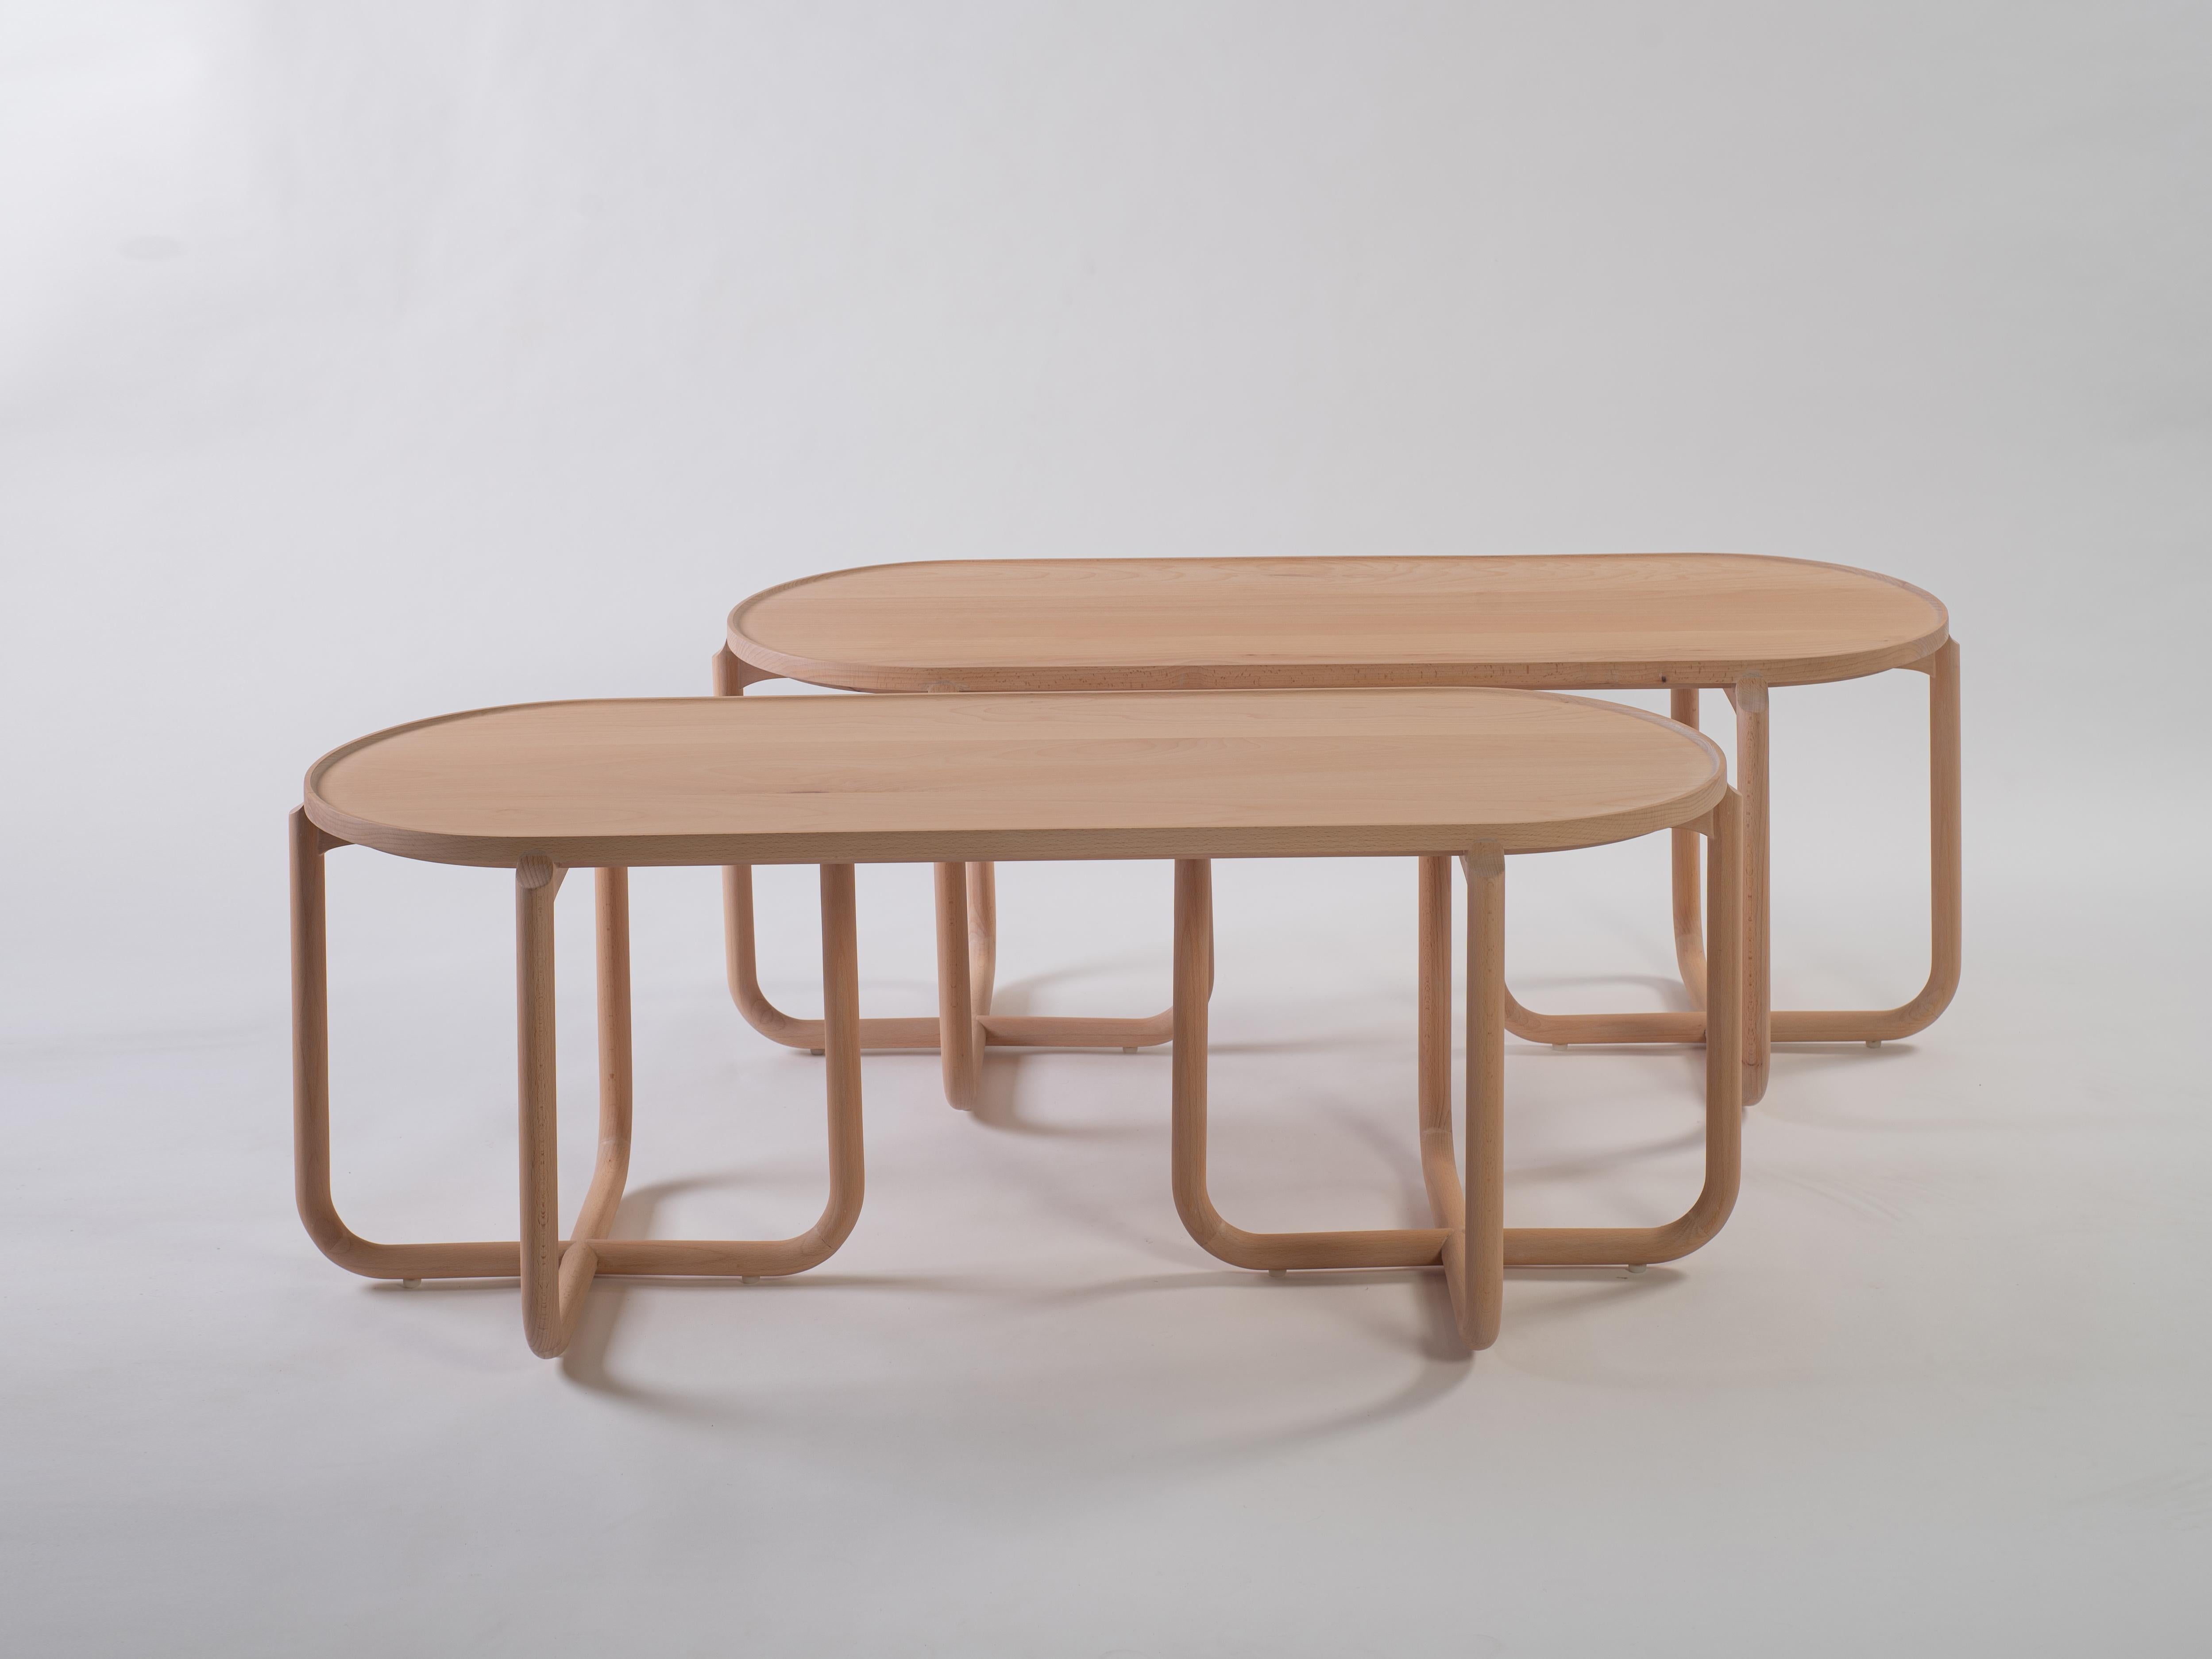 Verso Coffee Table, Beech Wood In New Condition For Sale In Zapopan, Jalisco